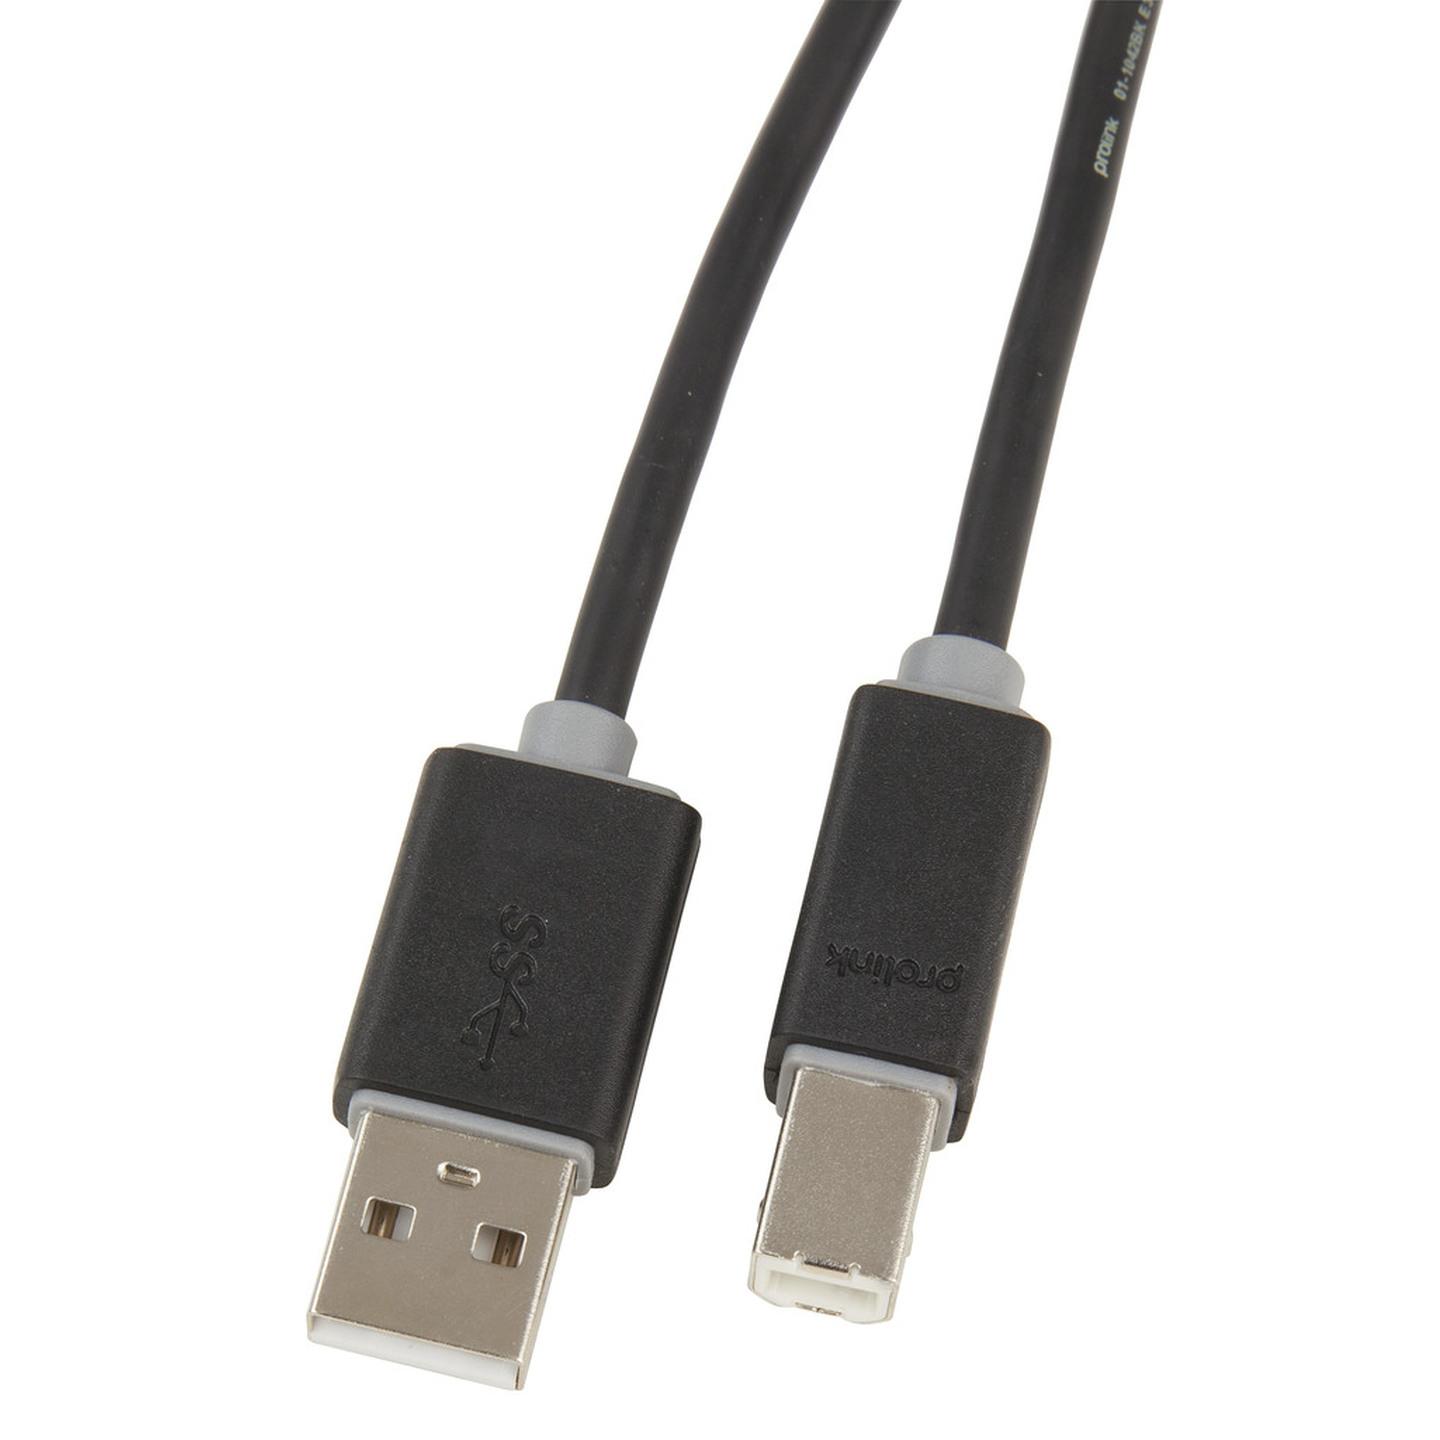 USB 2.0 A to B Cable - 5m